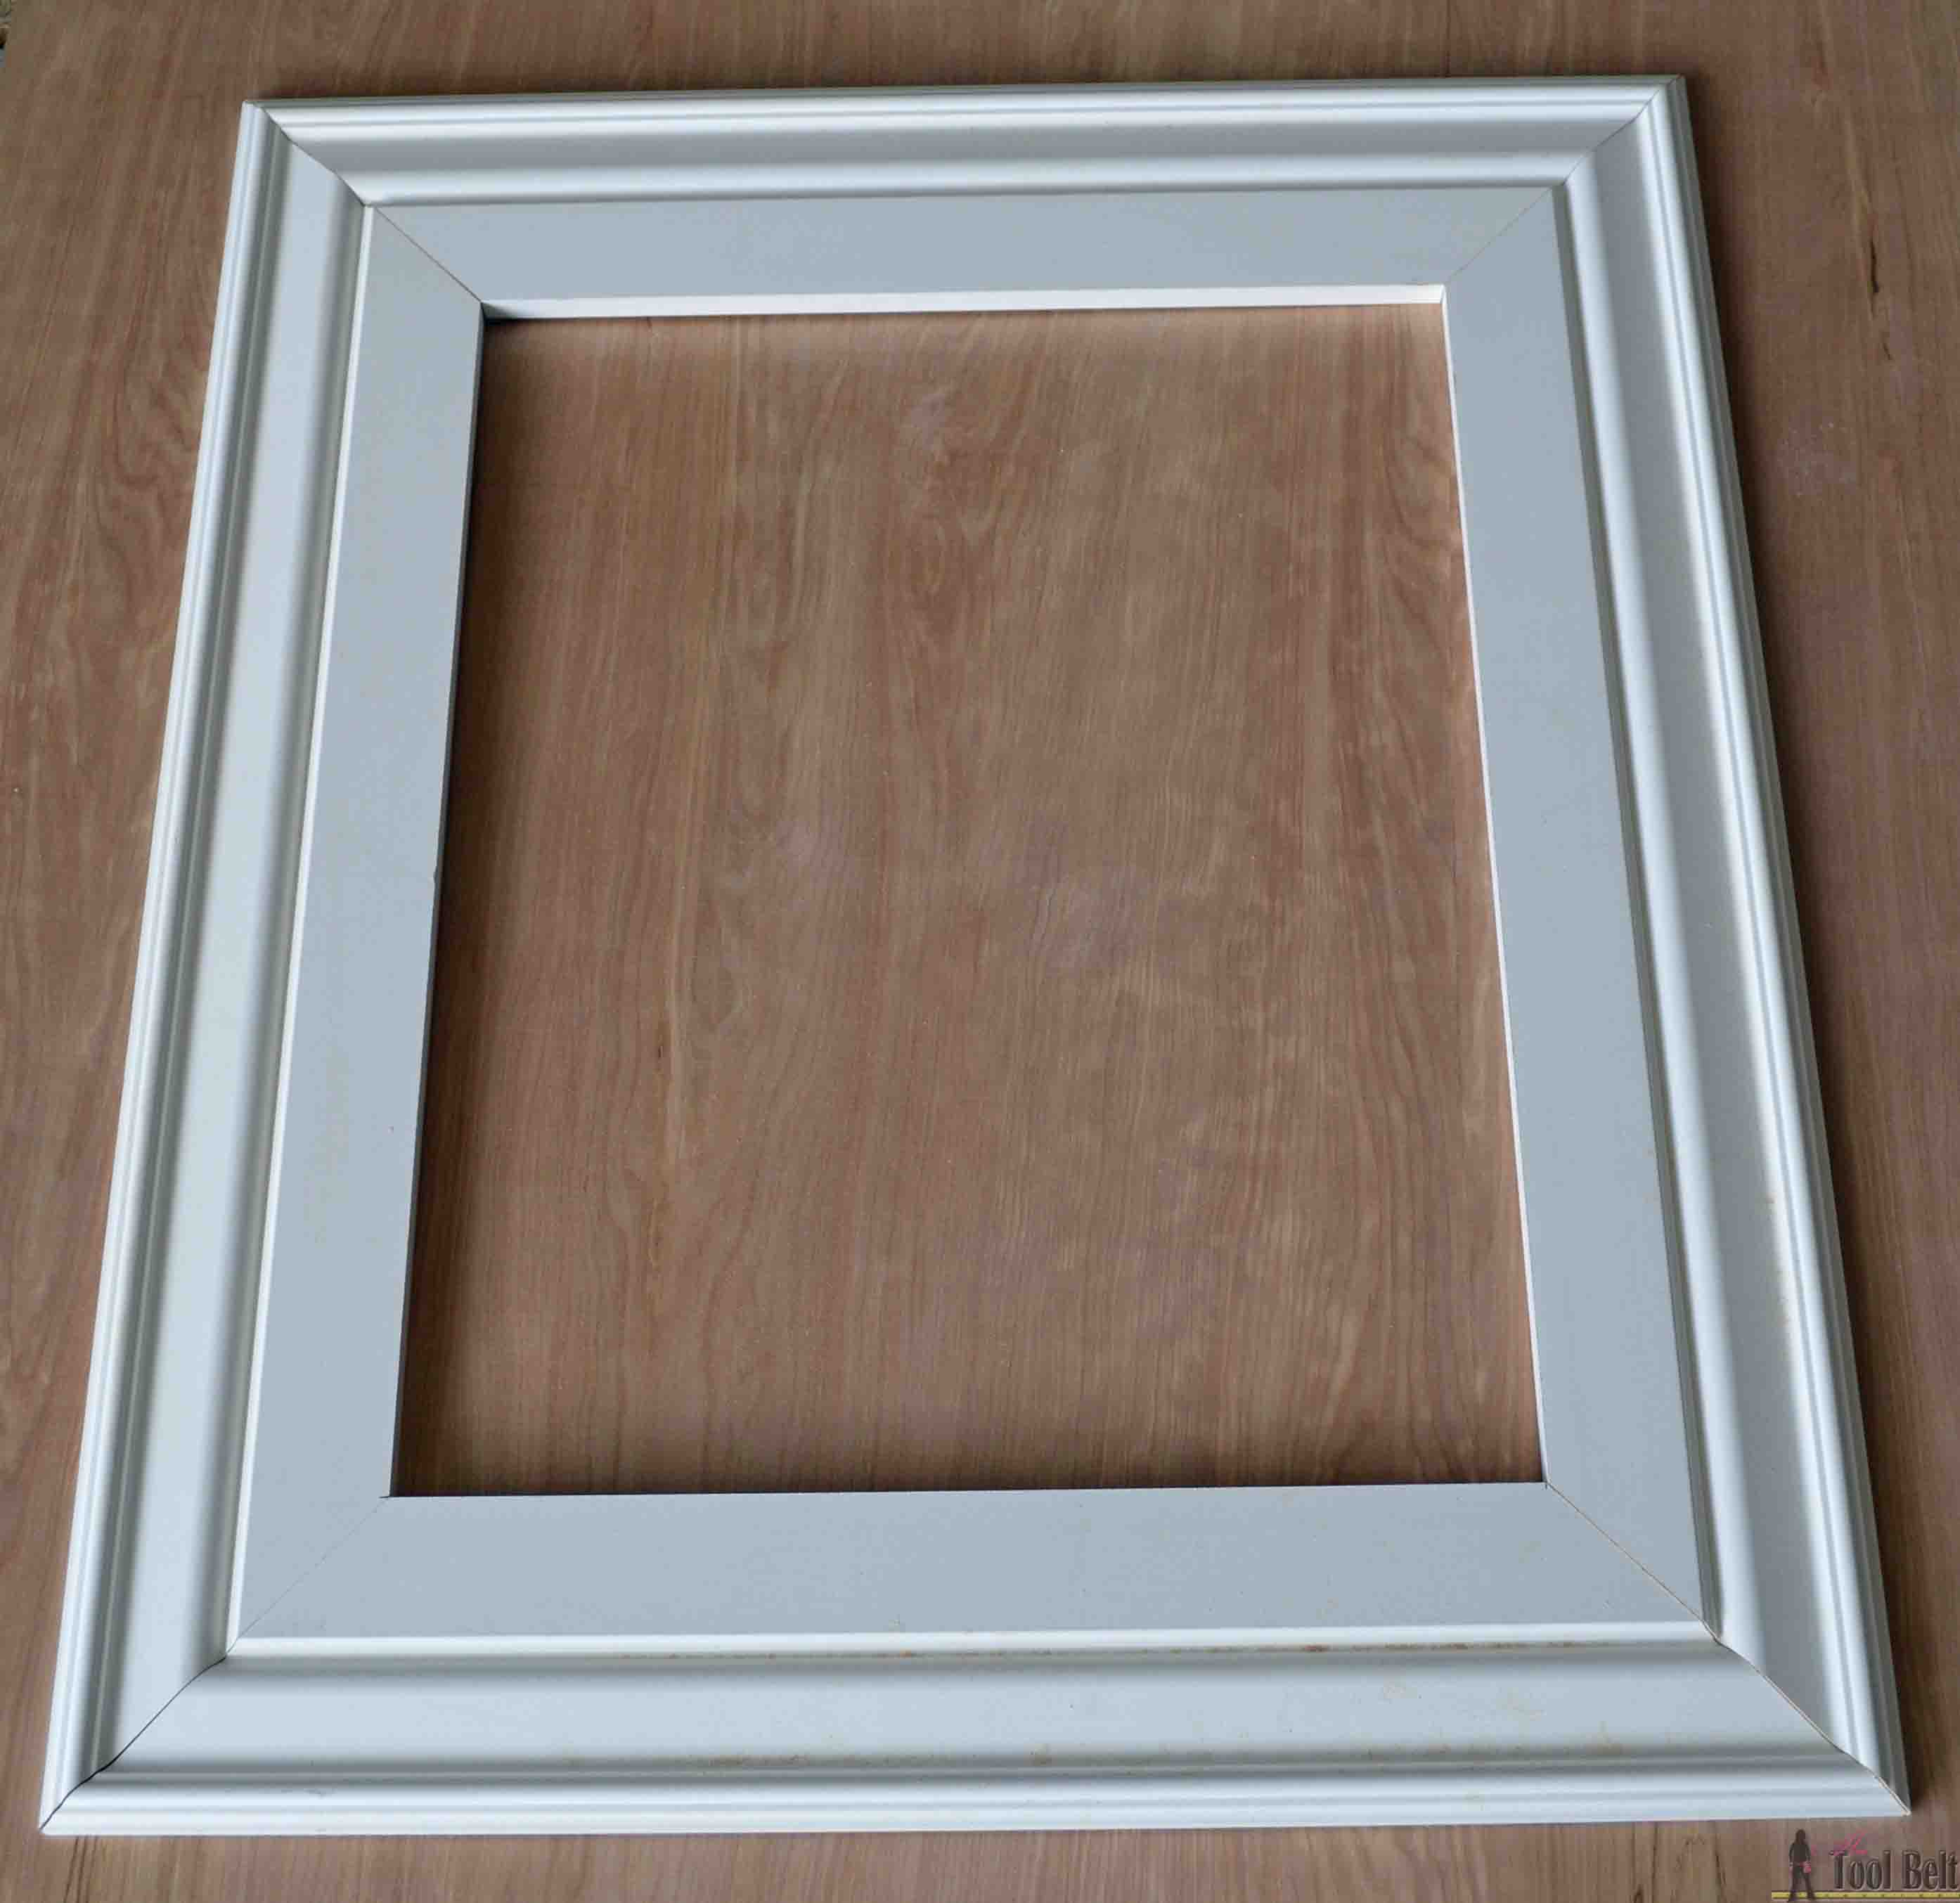 Removable DIY Picture Frame Moulding - Pretty in the Pines, New